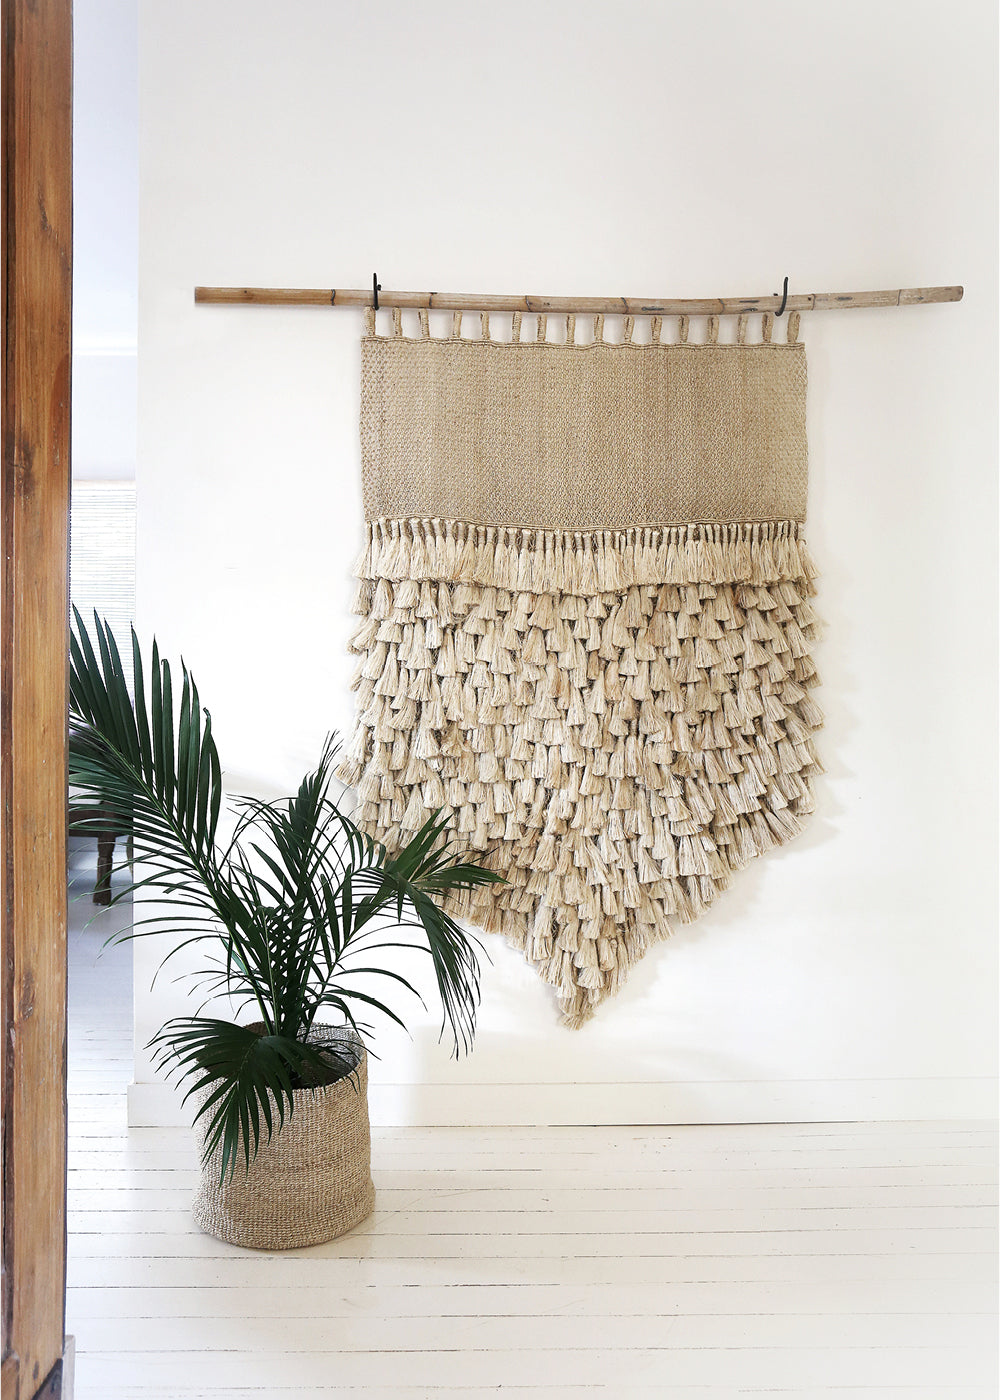 woven wall hangings - how they enhance any space. Natural jute tassel jumbo wall hanging on white wall.